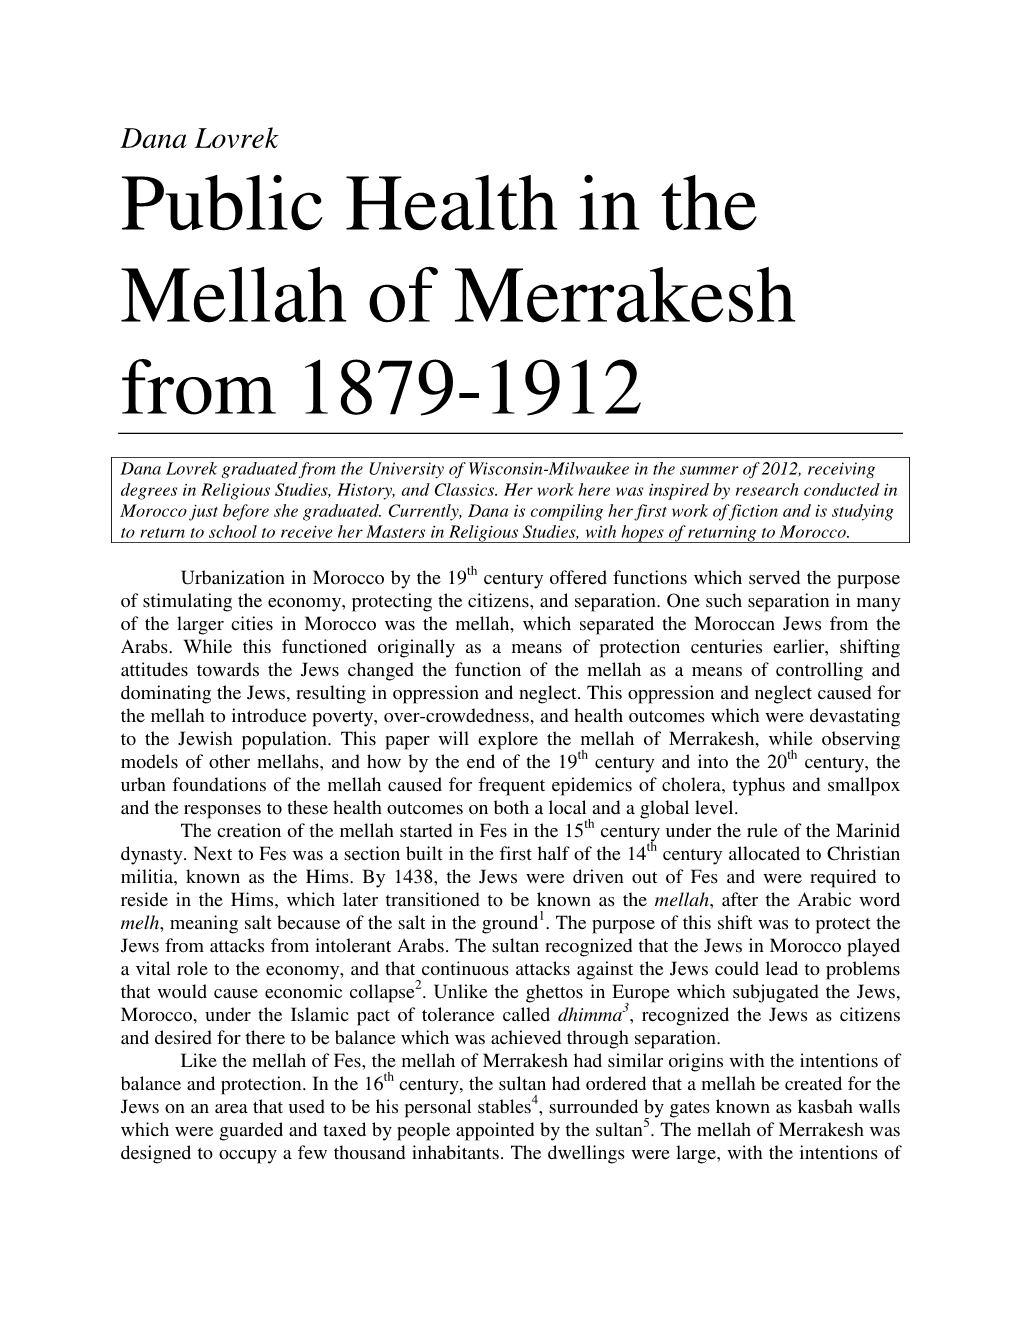 Public Health in the Mellah of Merrakesh from 1879-1912